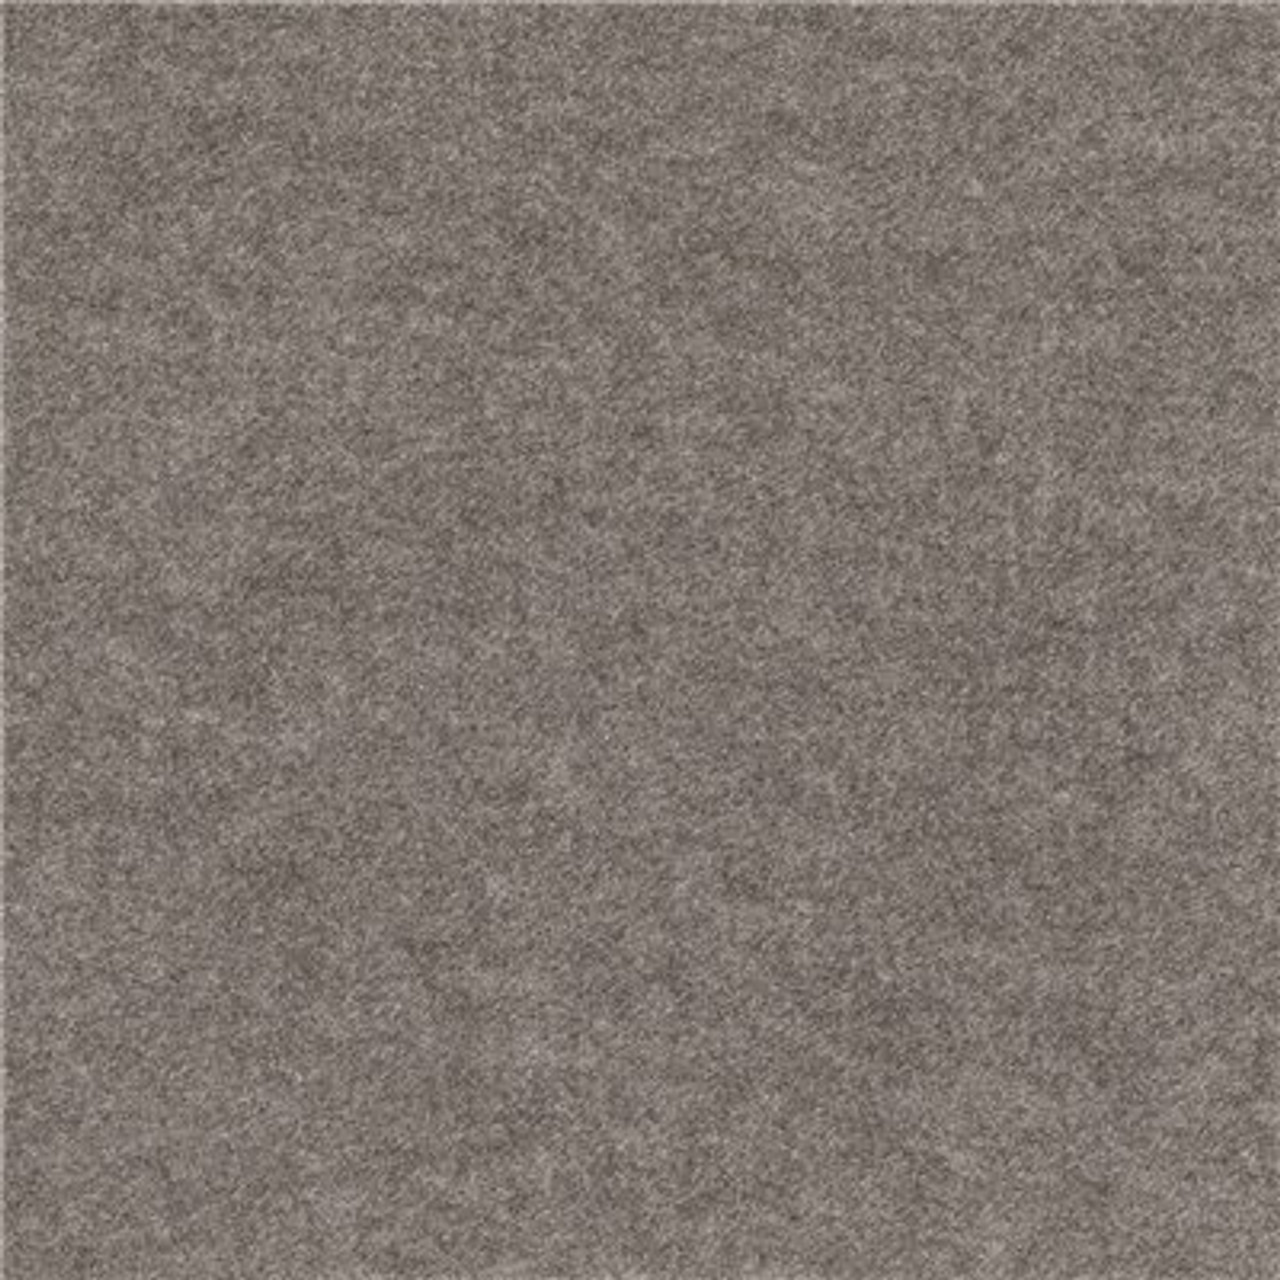 Foss Peel And Stick First Impressions Flat Sky Grey 24 In. X 24 In. Commercial Carpet Tile (15 Tiles/Case)